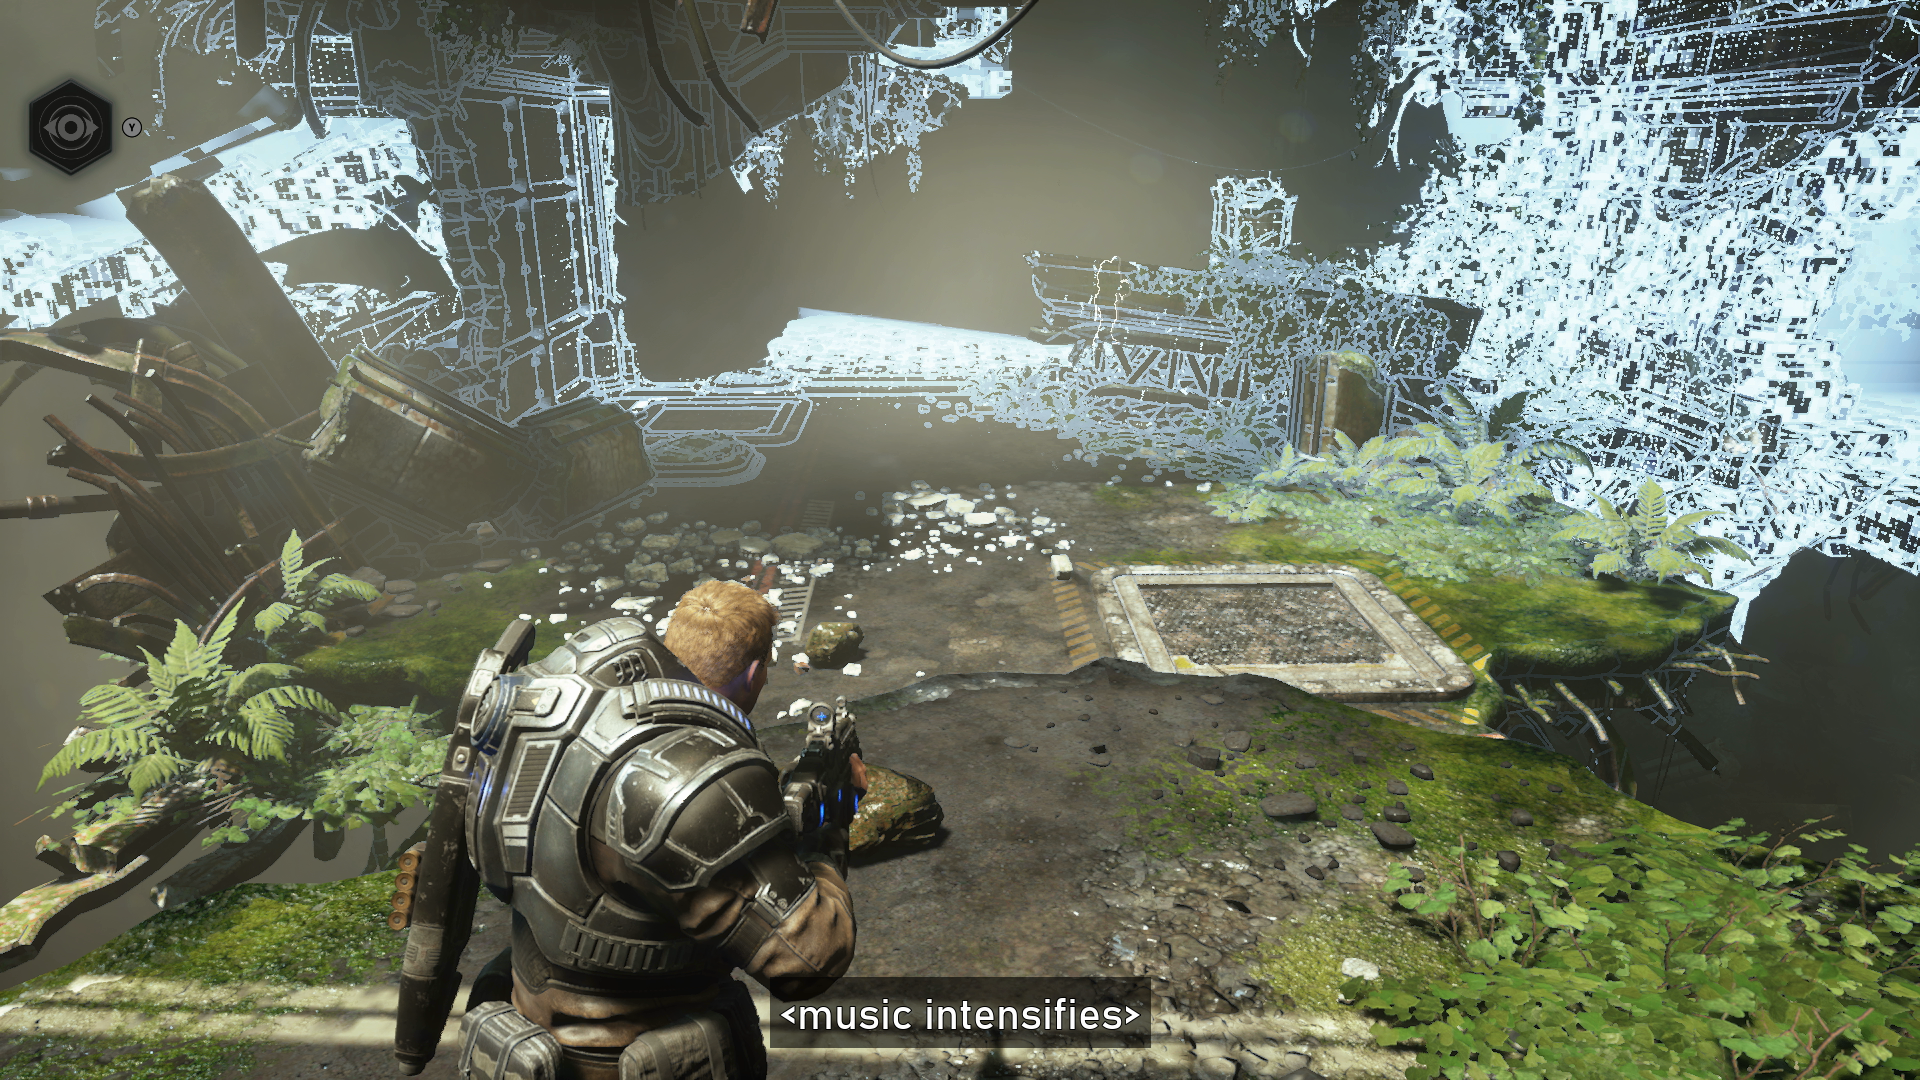 Gears 5 gameplay. The player is in the woods and their surroundings are beginning to disappear. There's a subtitle at the bottom of the screen that says, "music intensifies" surrounded by angle brackets.